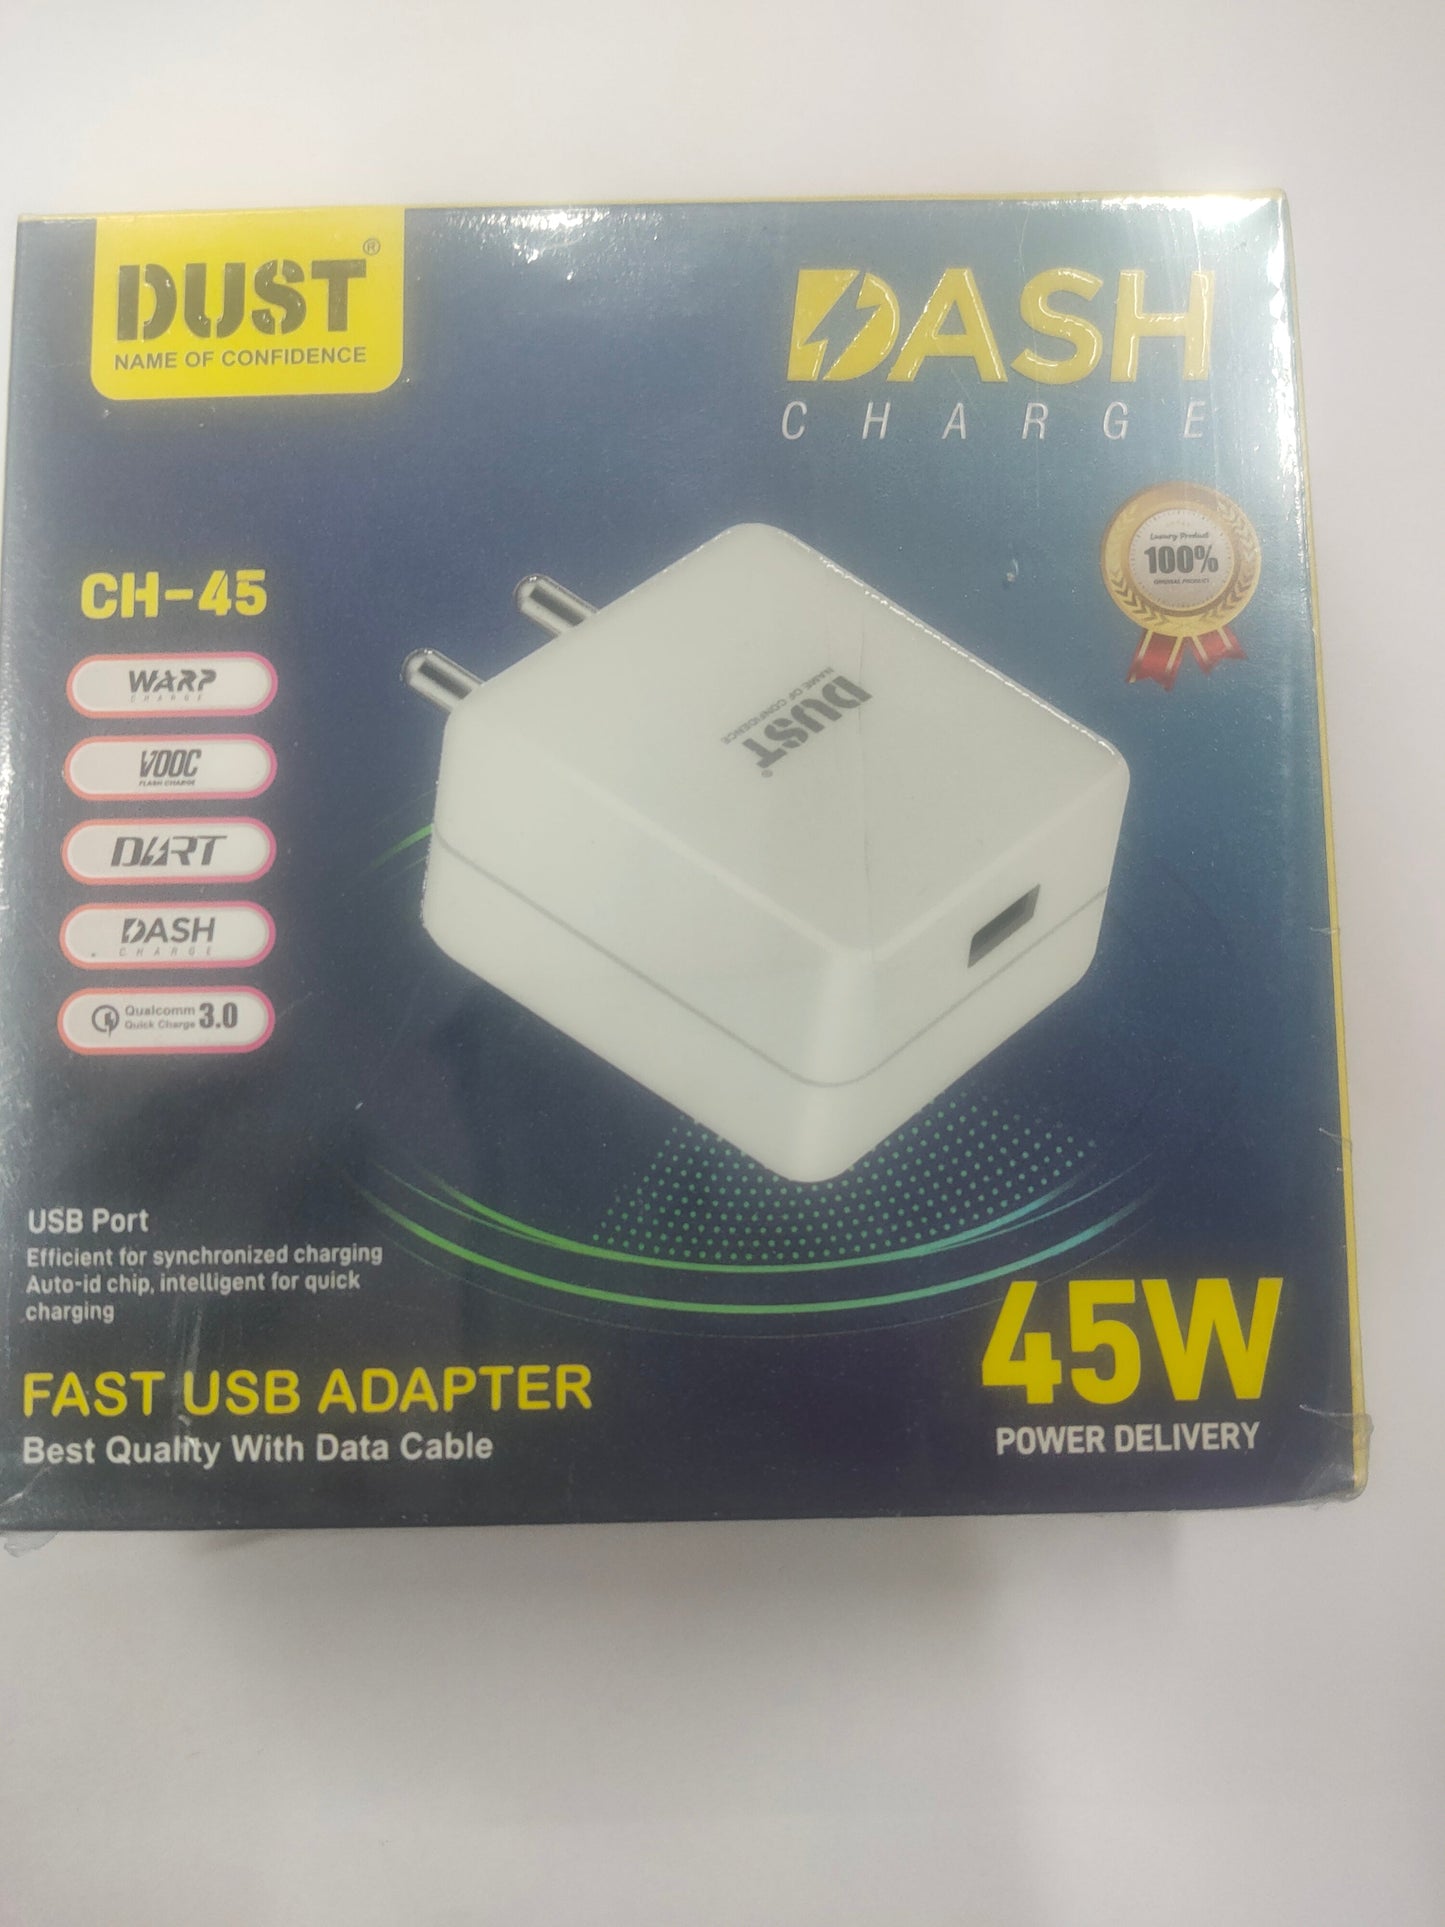 DUST CH-45 Dash 45W/ Type C Charger/1 solar lamp free on 5 piece purchase